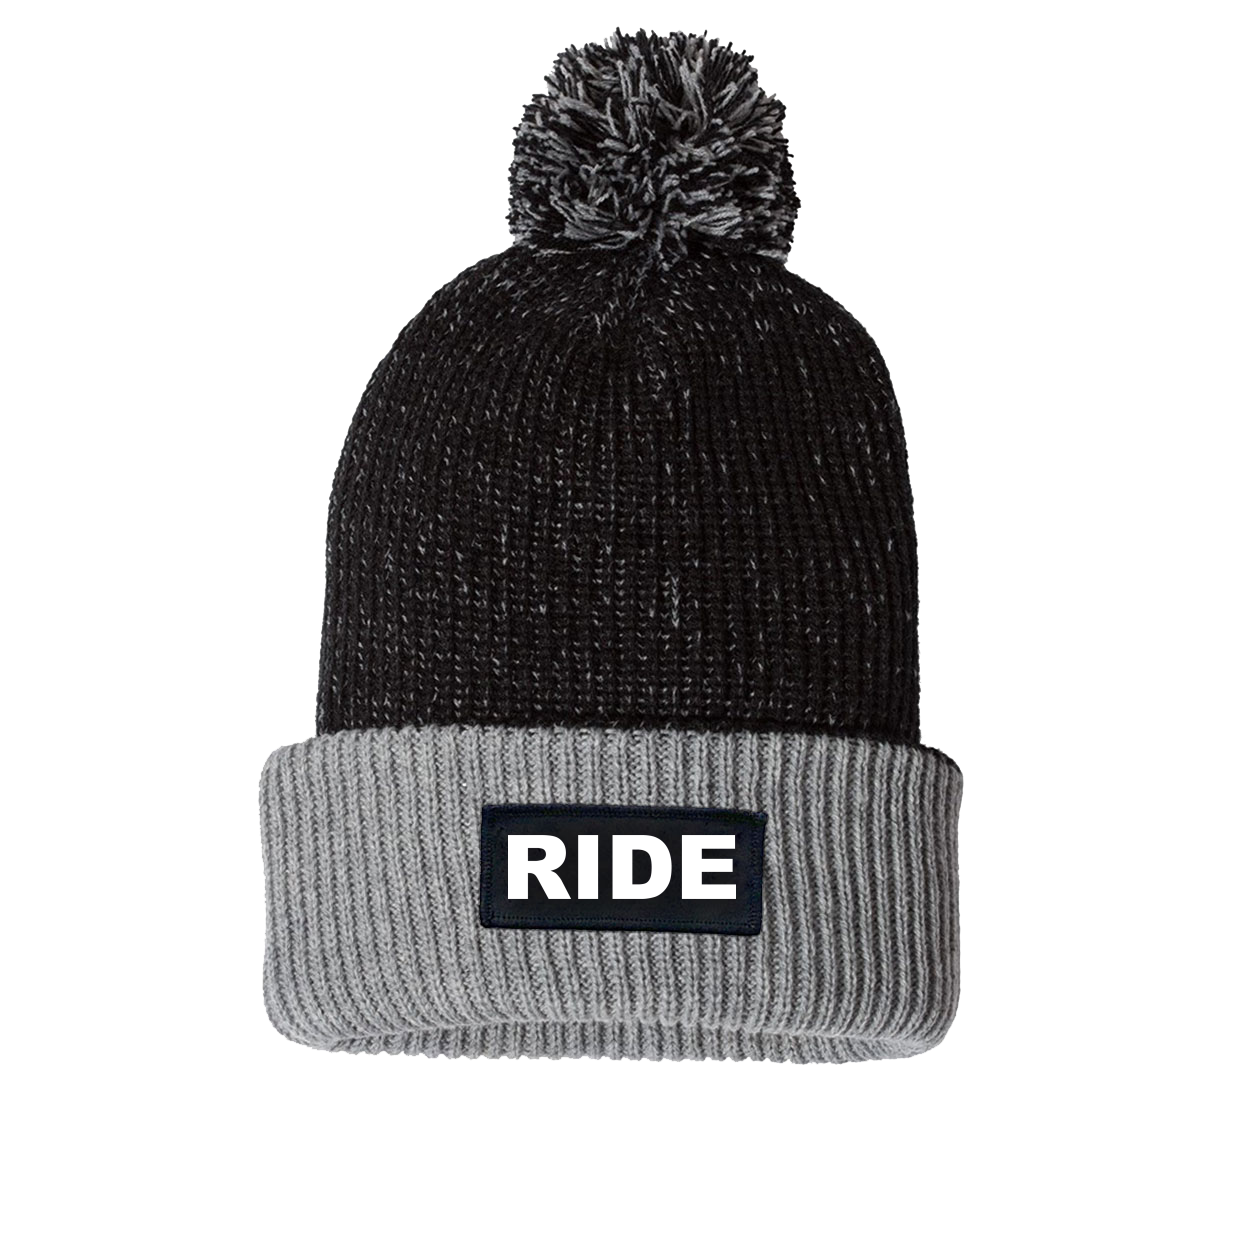 Ride Brand Logo Night Out Woven Patch Roll Up Pom Knit Beanie Black/Gray